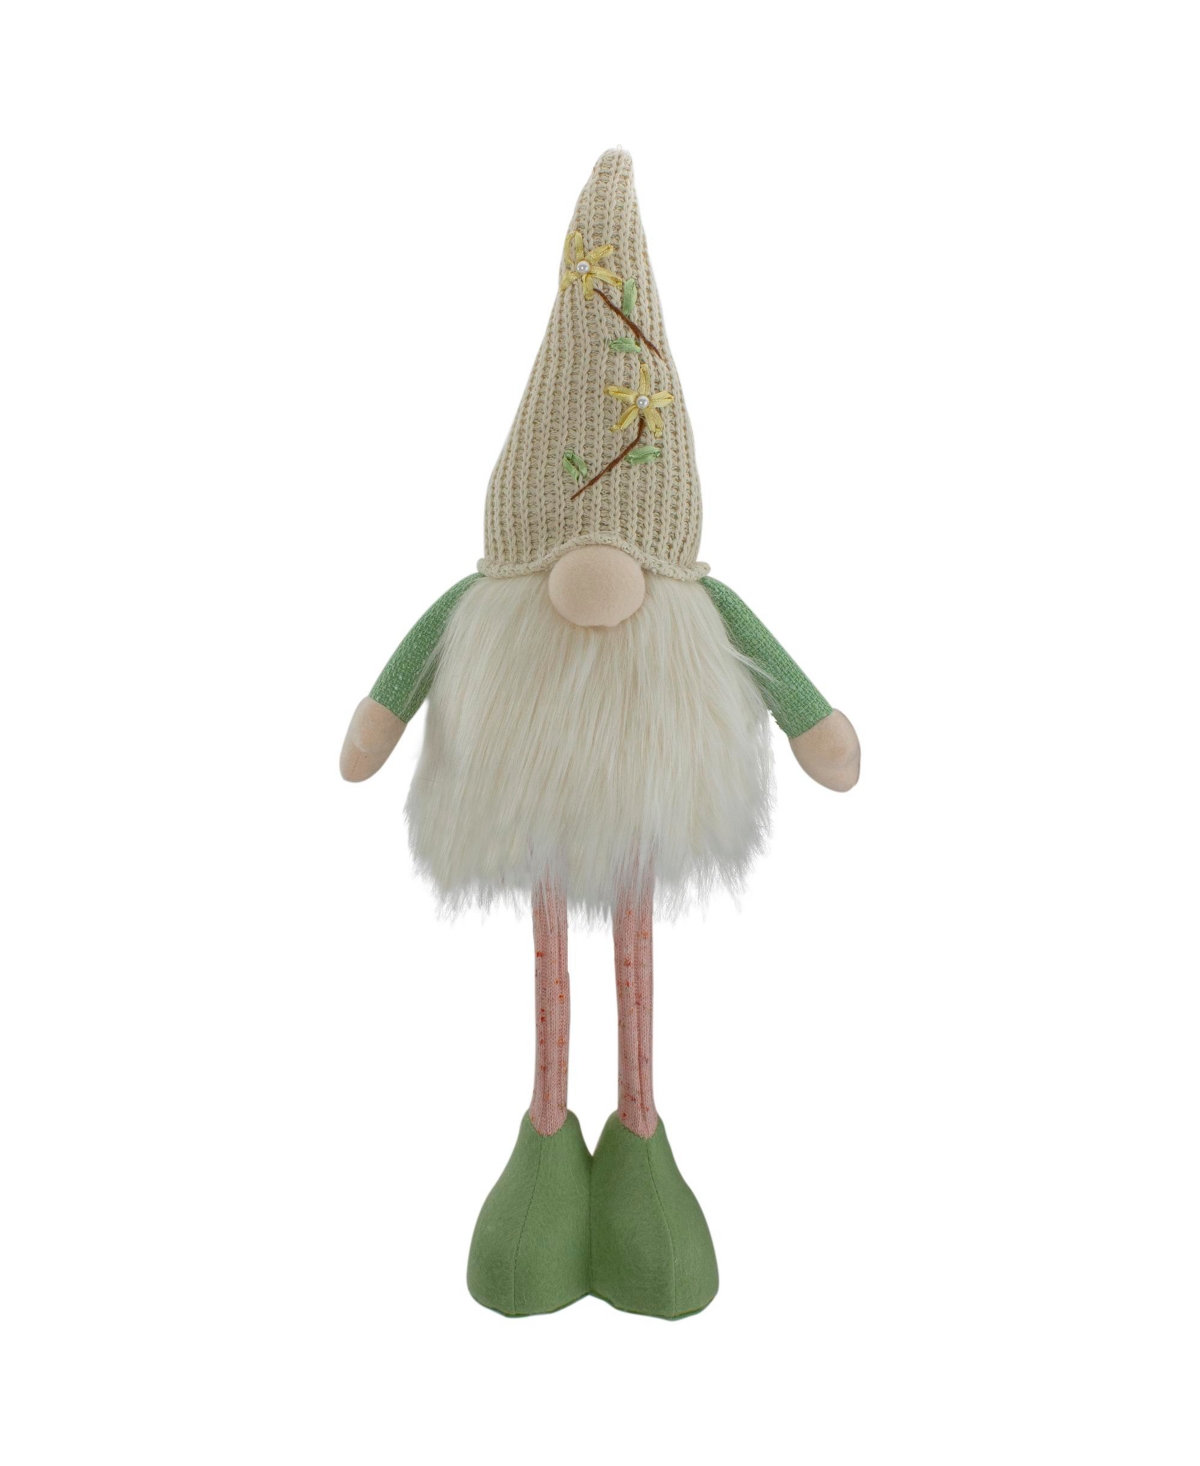 Northlight 22" Lighted Green And Cream Standing Spring Gnome Figure With Knitted Hat